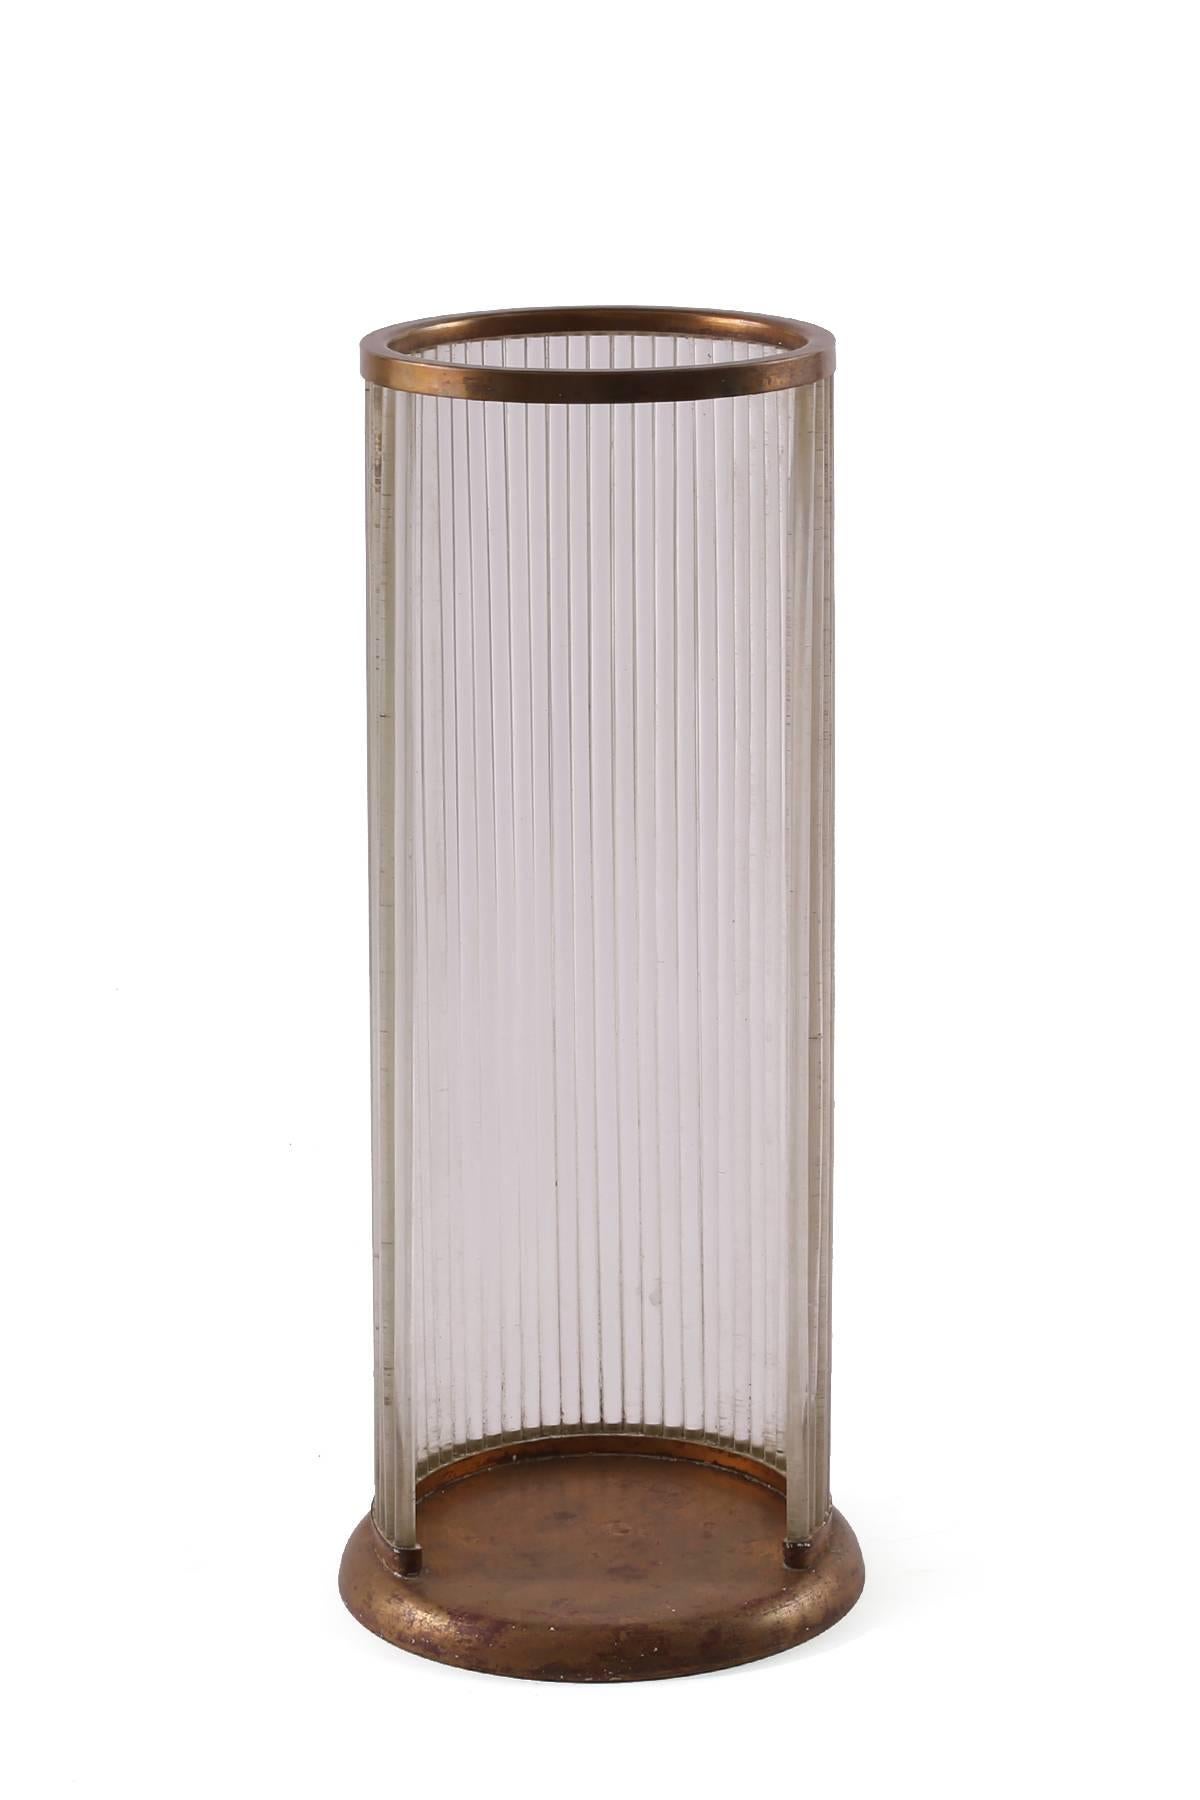 Lucite and bronze finished metal umbrella stand from Italy, circa early 1970s. This example reminiscent of the works of Gabriella Crespi has a beautifully patinated base and top that are connected by tubular rods of Lucite.